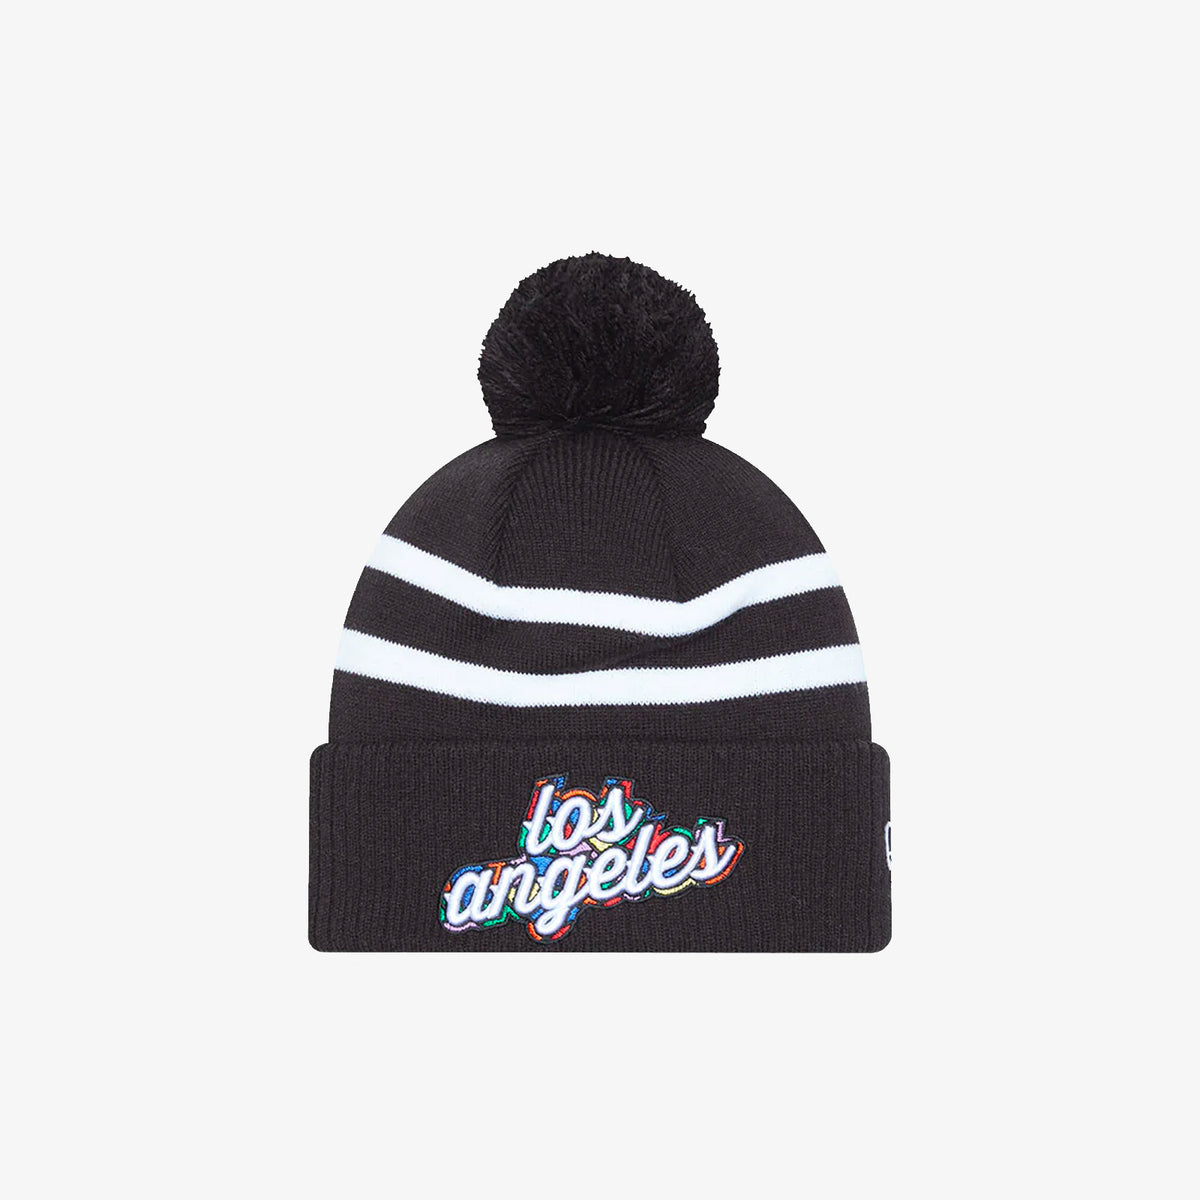 Los Angeles Clippers 9Fifty City Edition Beanie